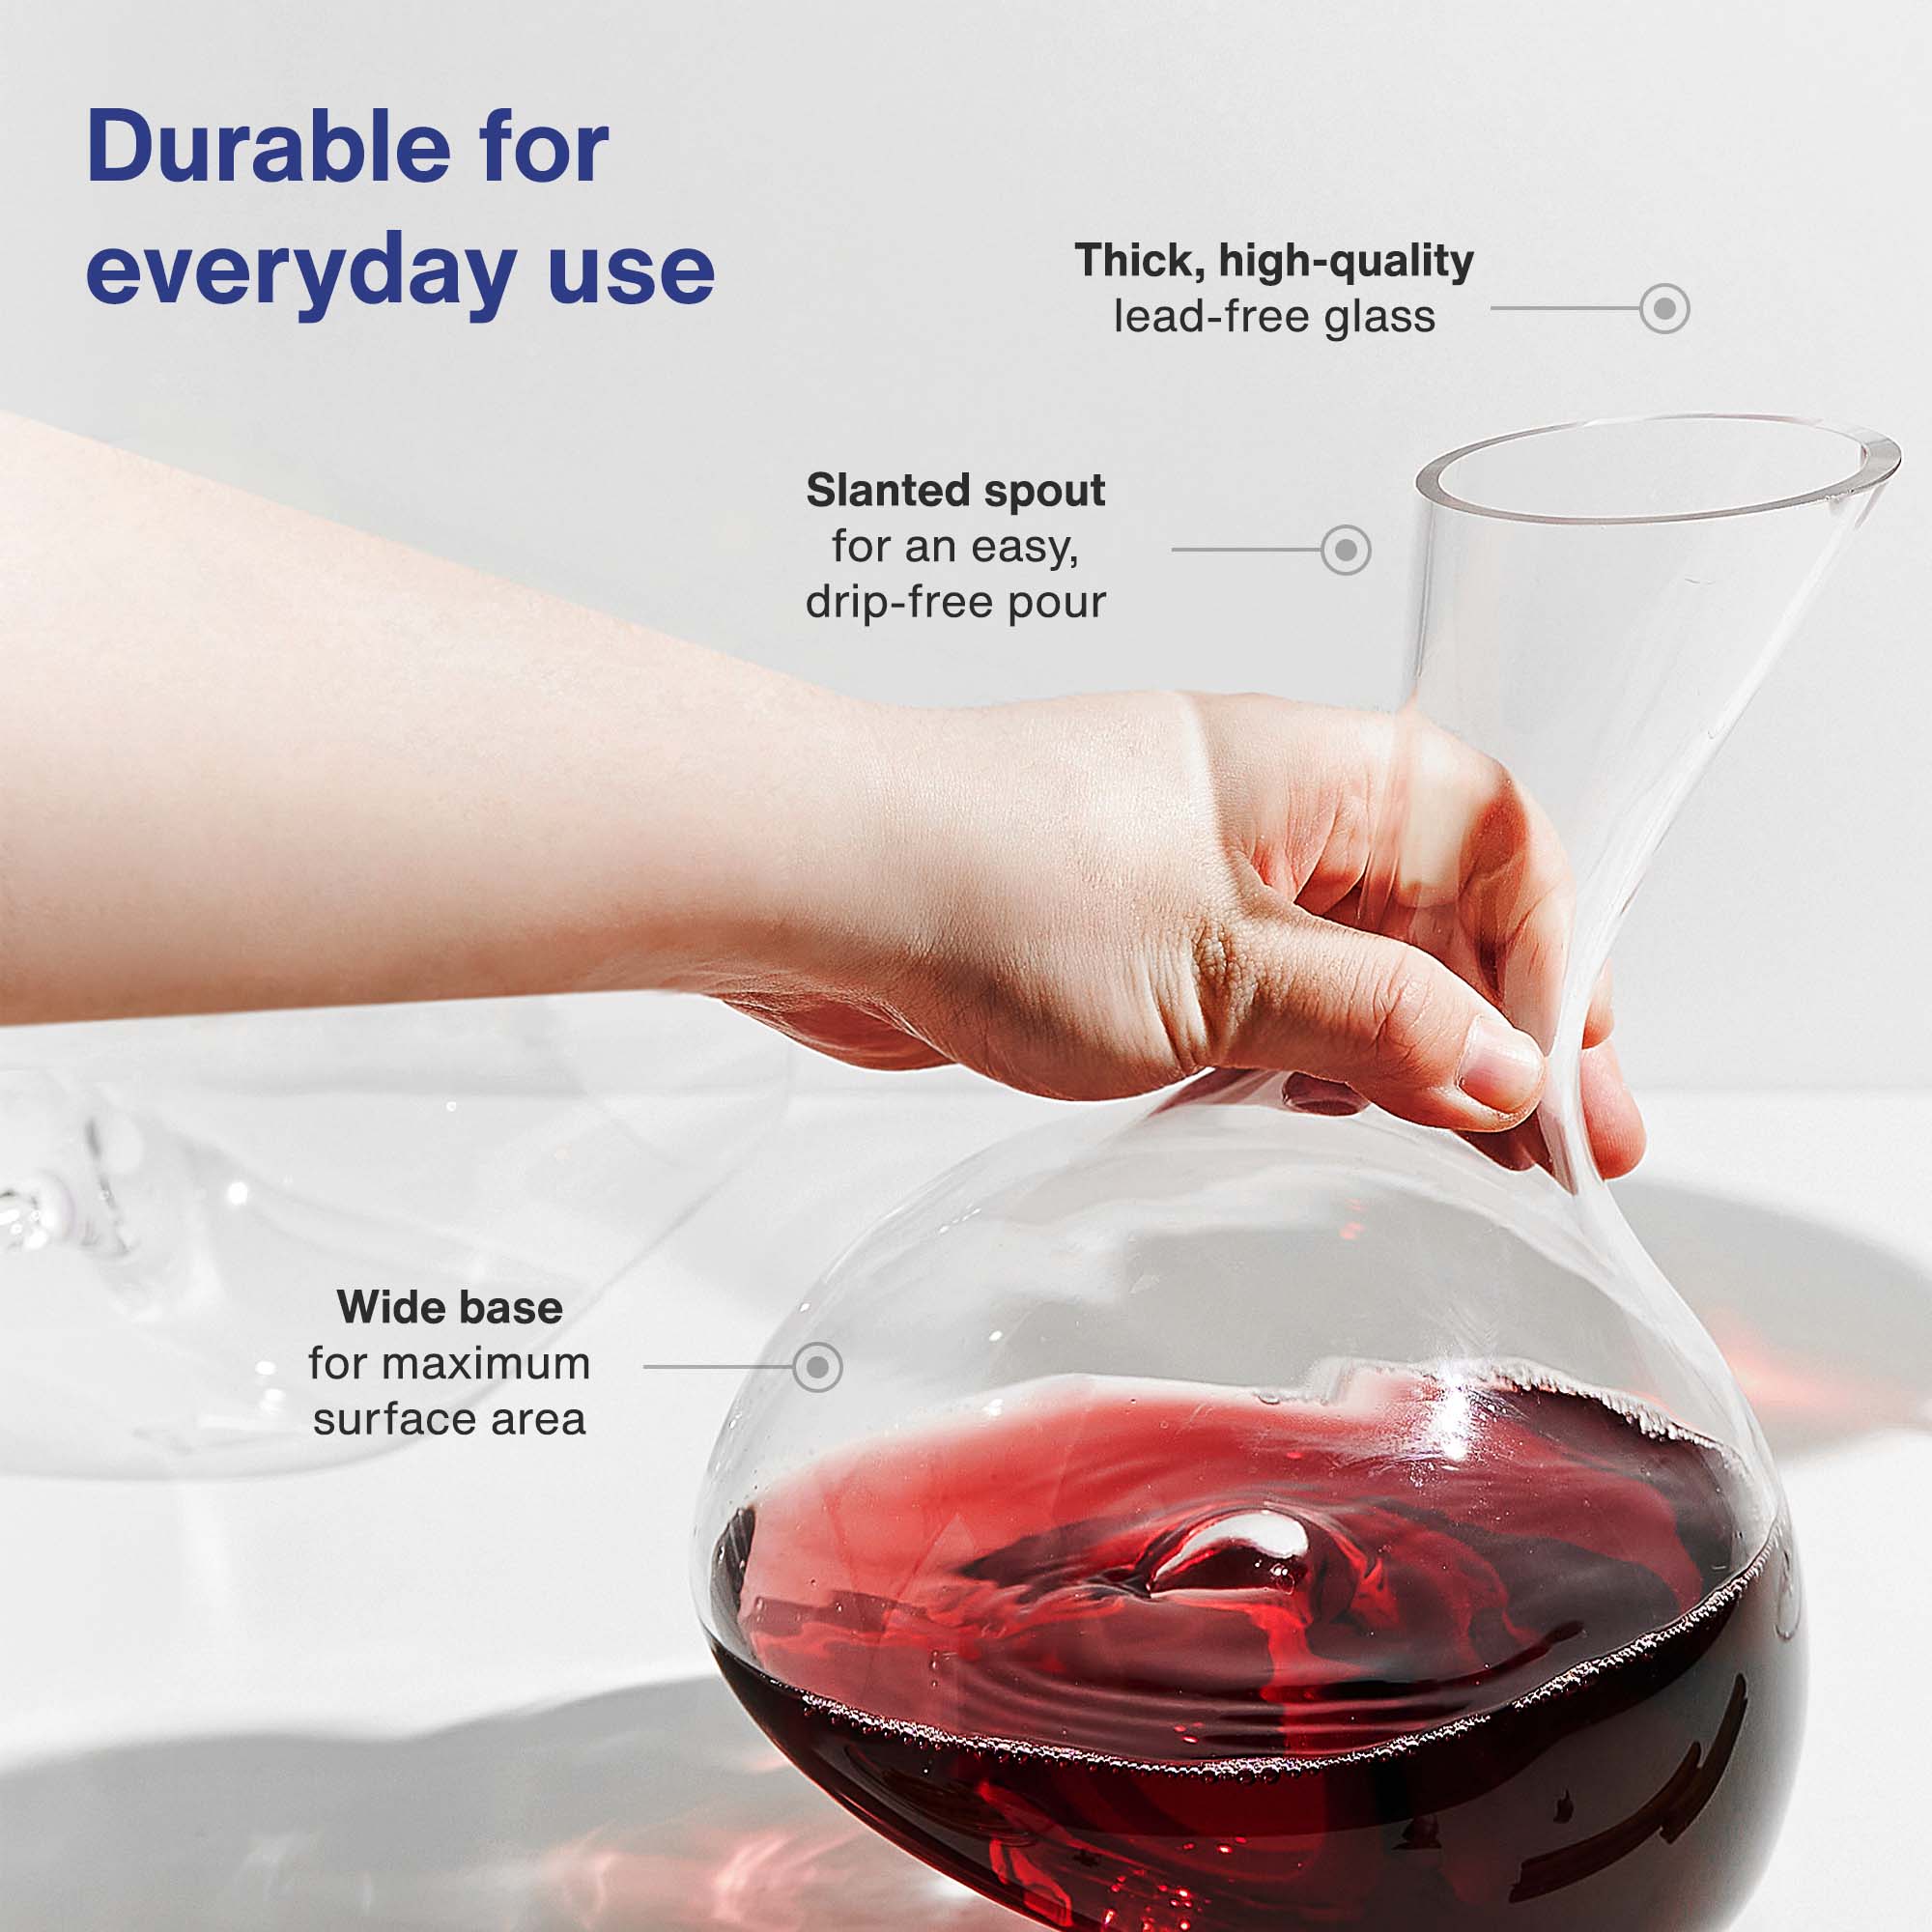 Choosing the Proper Wine Decanter and Glassware for Your Needs